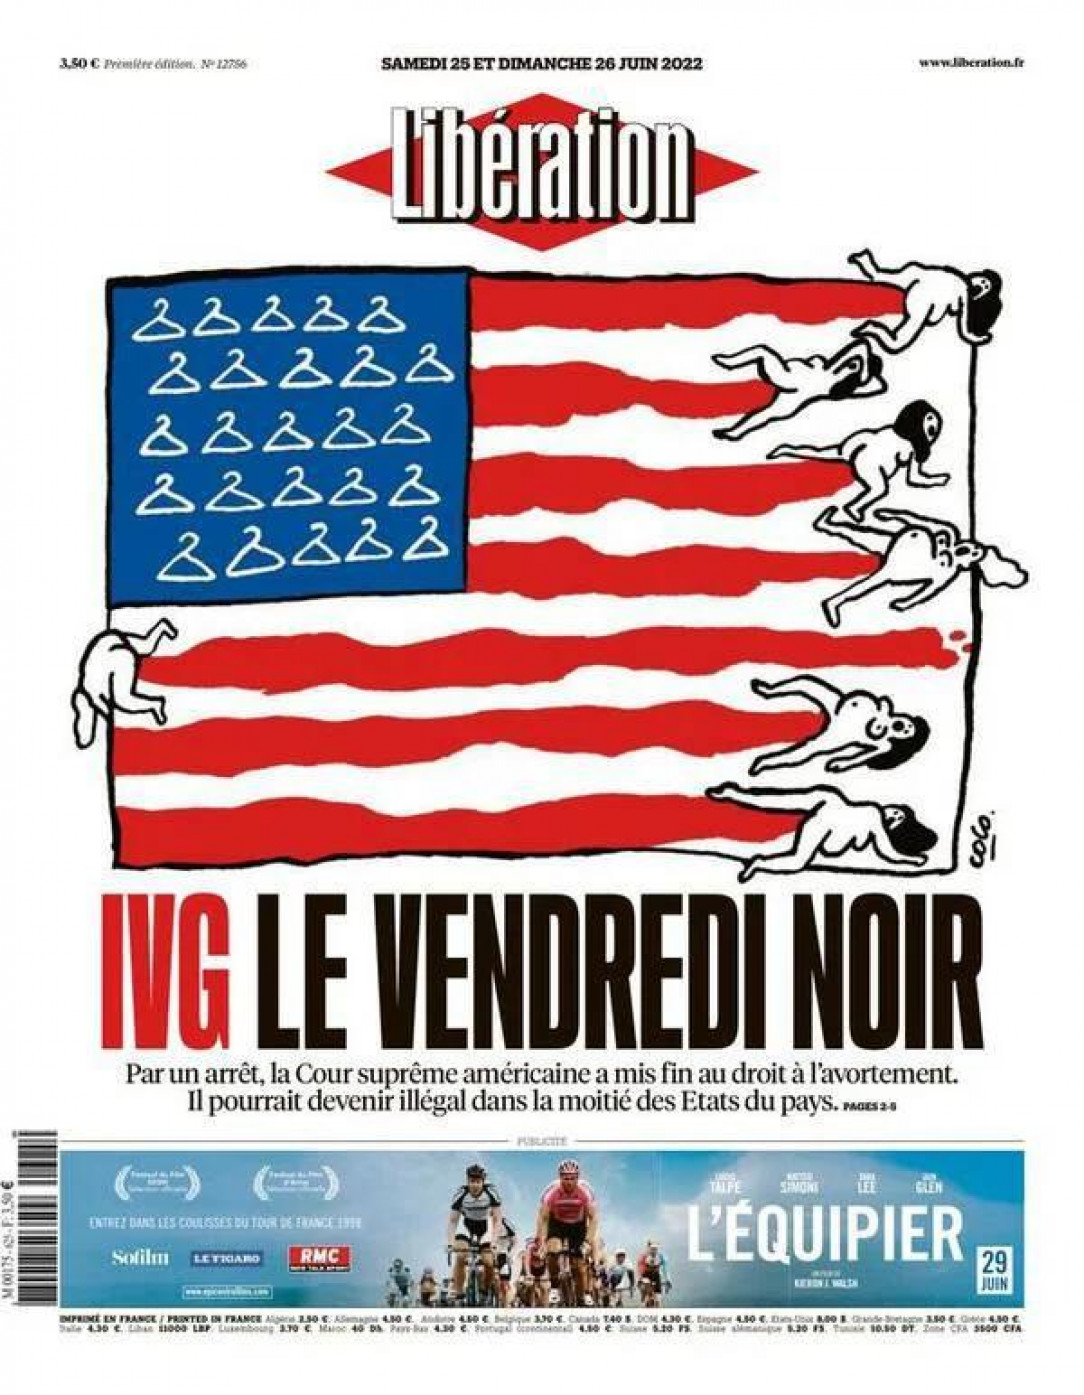 Front page of Liberation